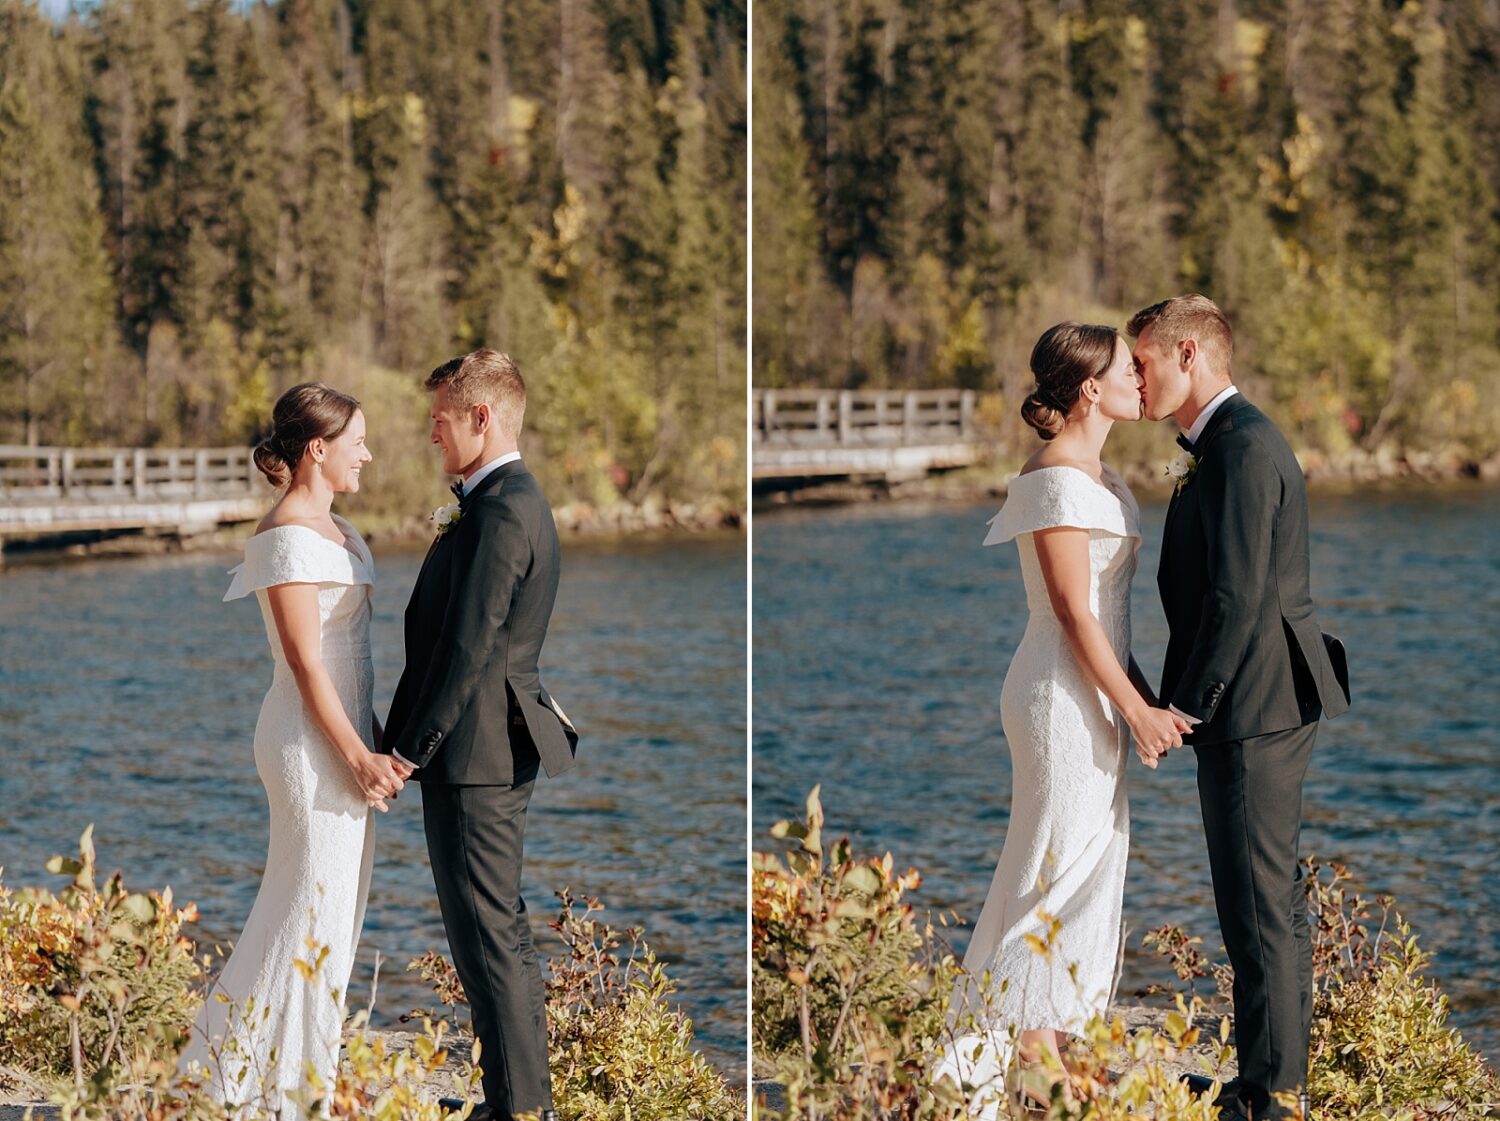 Jasper Pyramid Lake Lodge portraits of bride and groom at their elopement